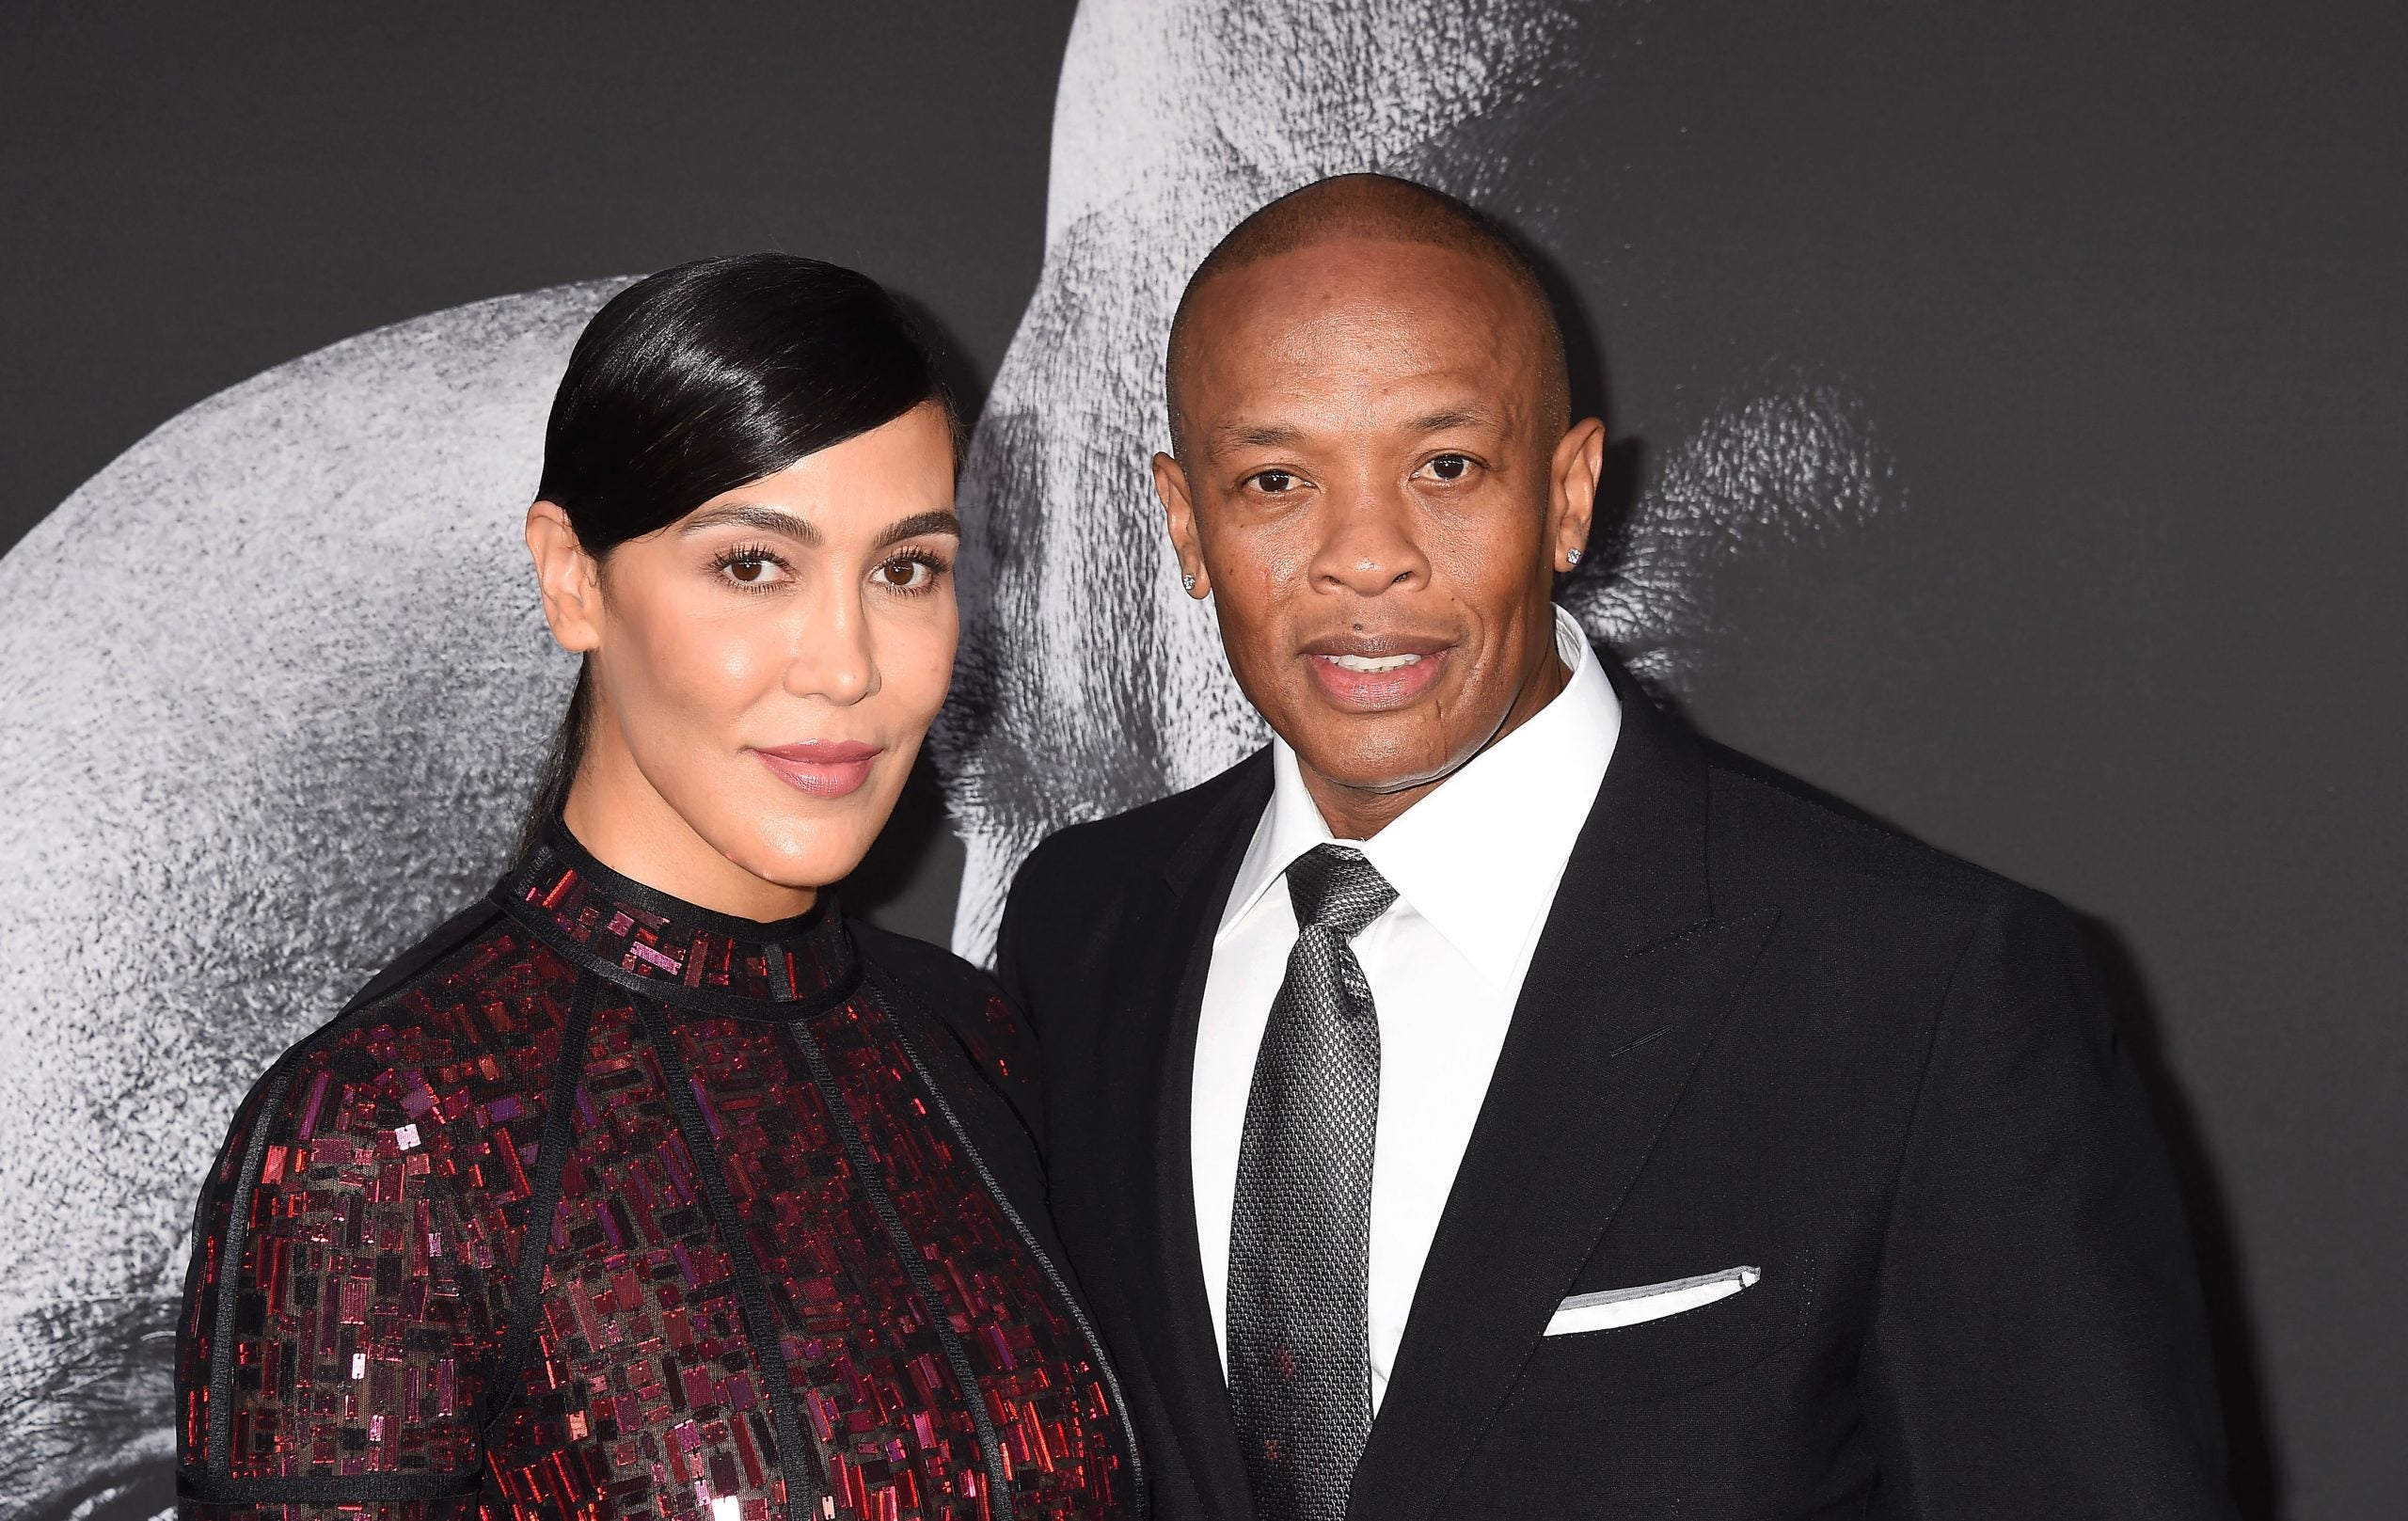 Dr. Dre Ordered To Pay $3 Million A Year In Spousal Support Until Nicole Young Remarries